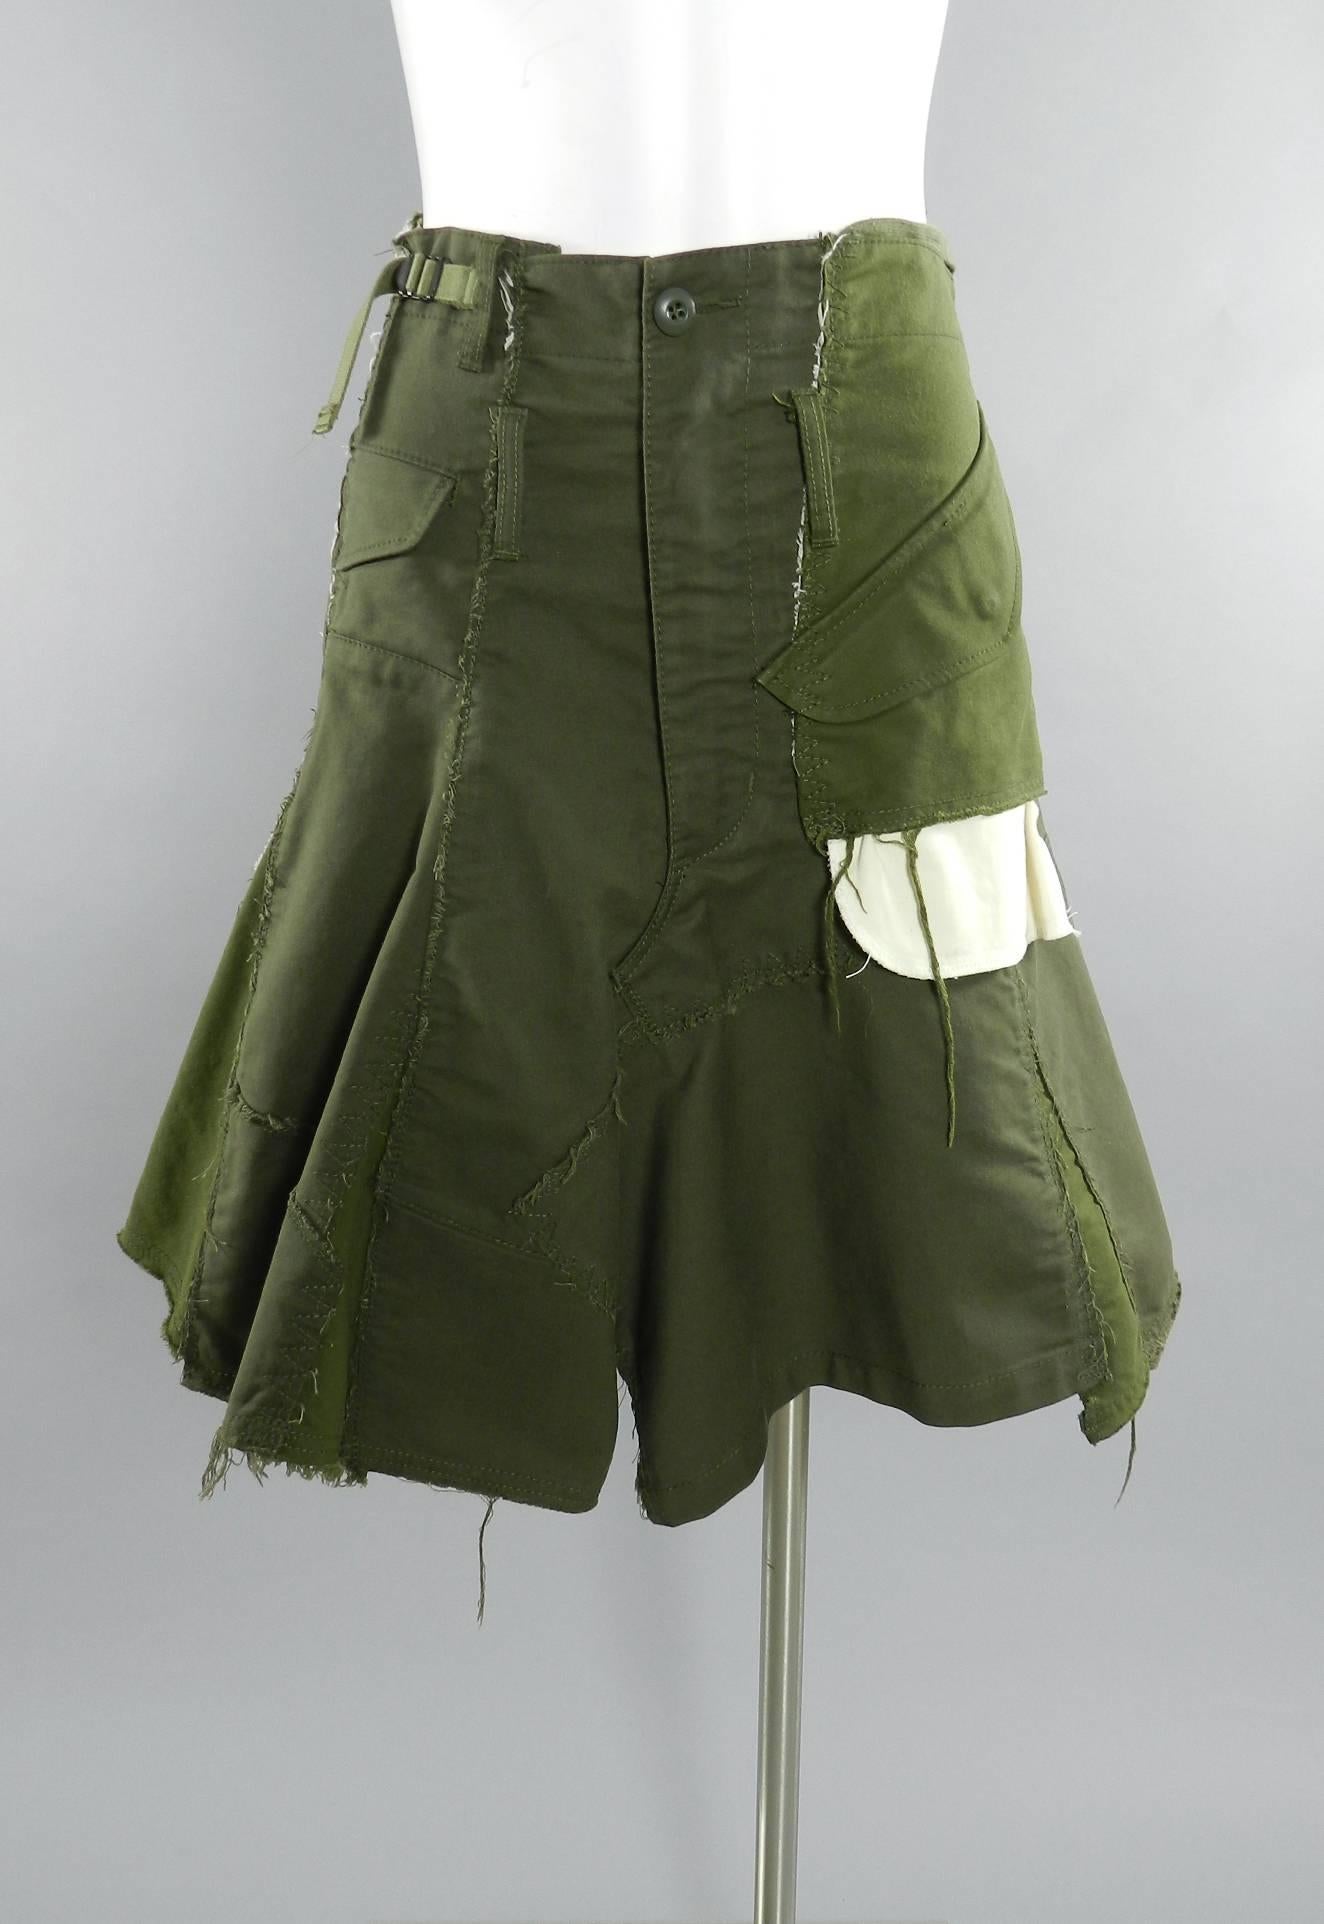 junya watanabe comme des garcons Deconstructed Army skirt 2